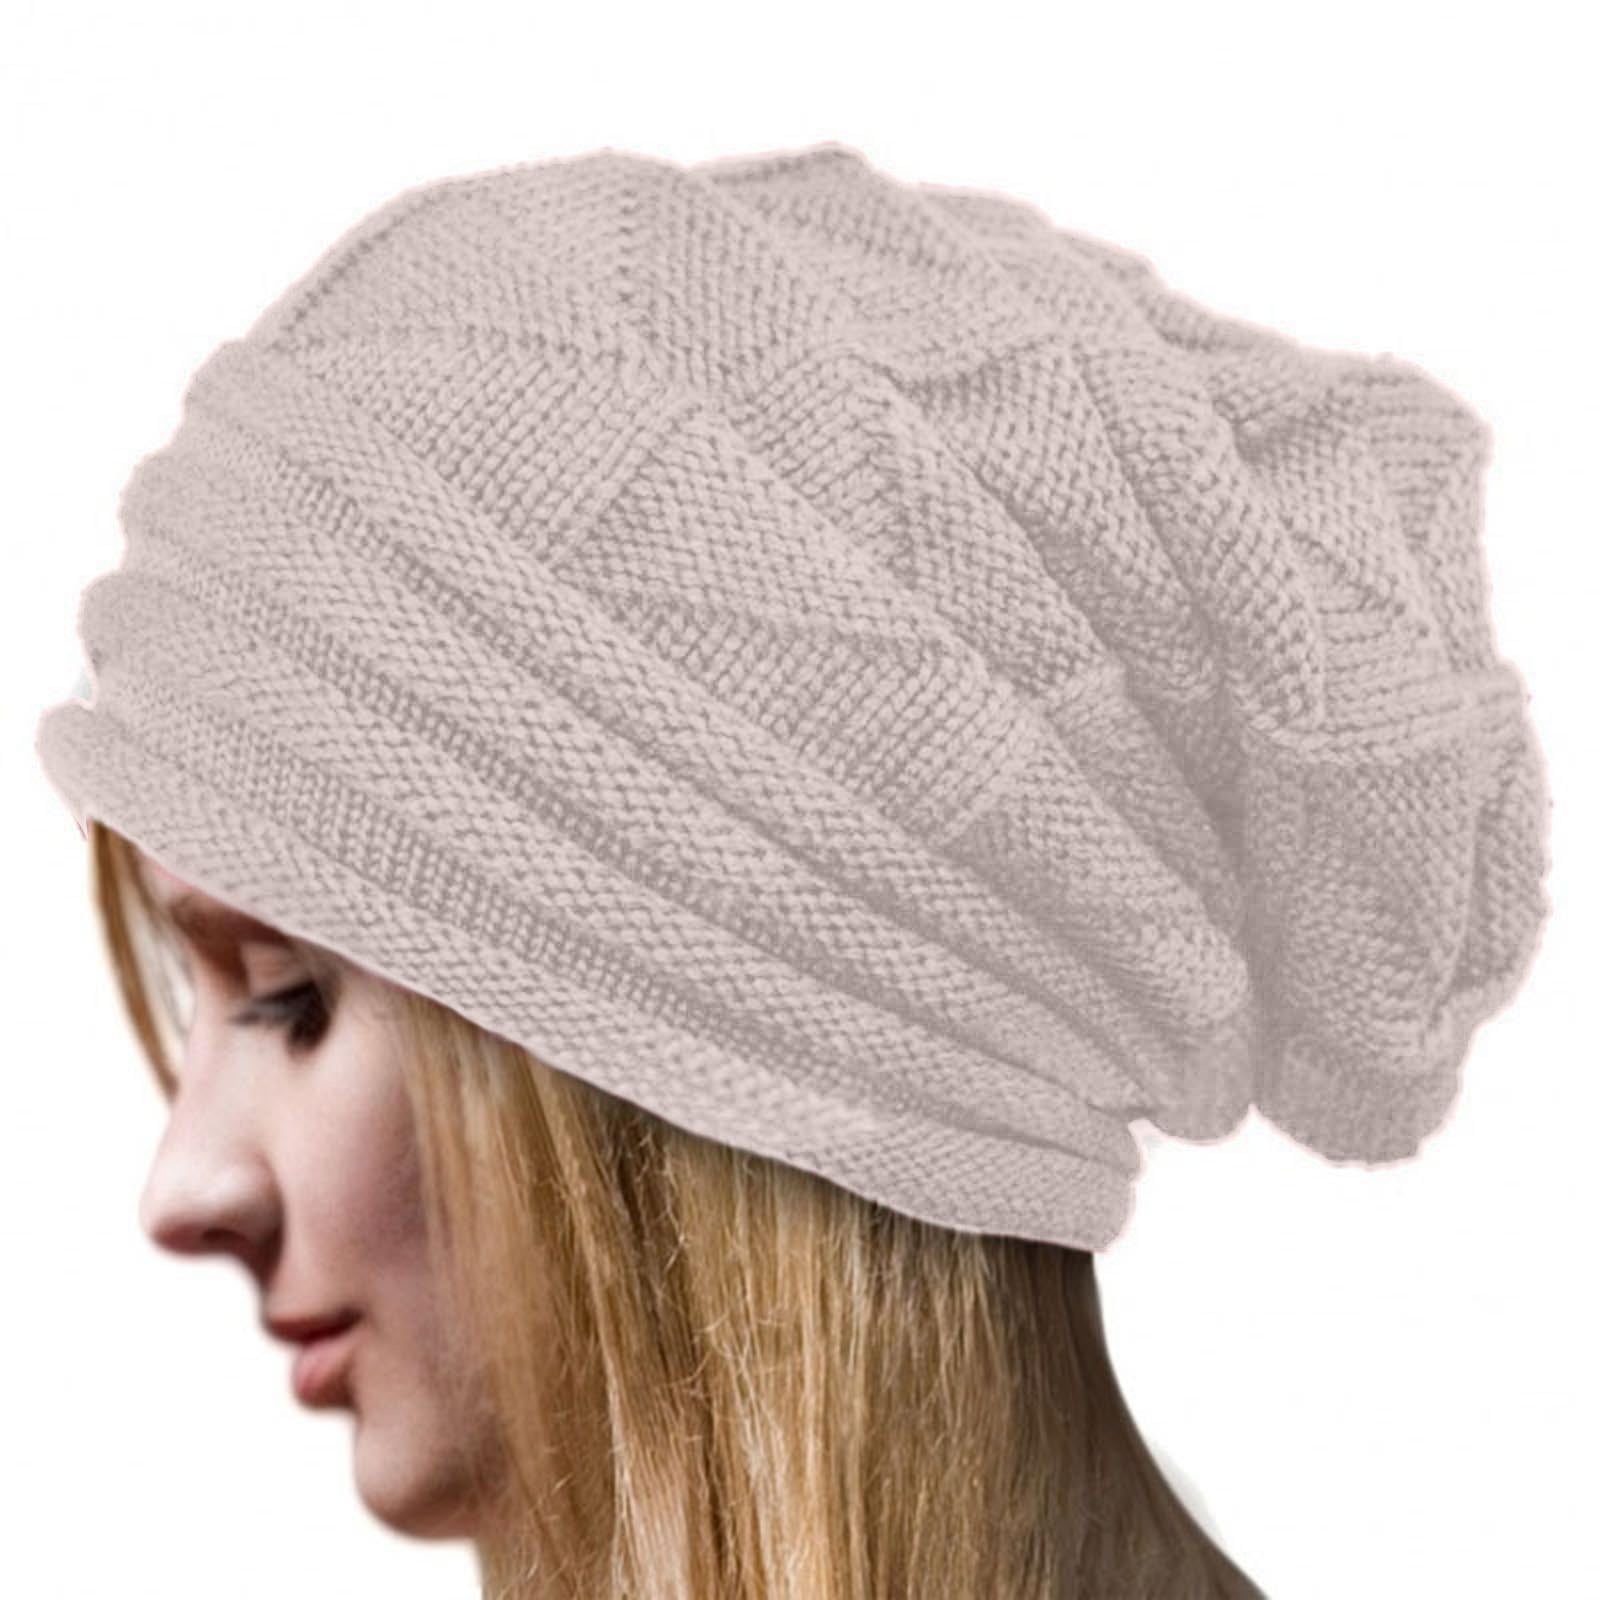 RPVATI Women Winter Chunky Hat Soft Warm Slouchy Cable Knit Beanie Hats 